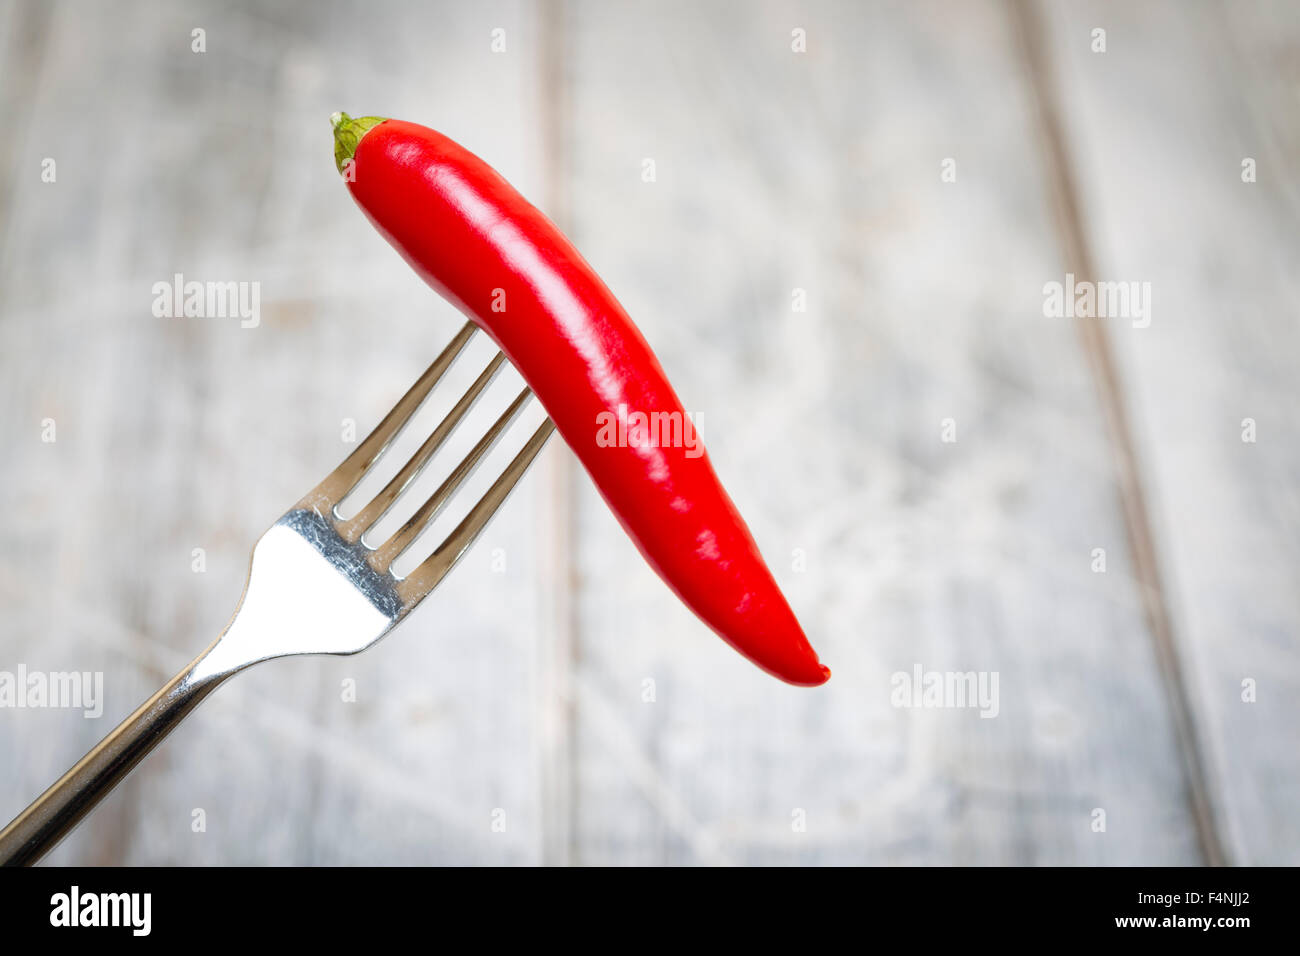 Red Chilli on fork over a rustic white blurred background Stock Photo